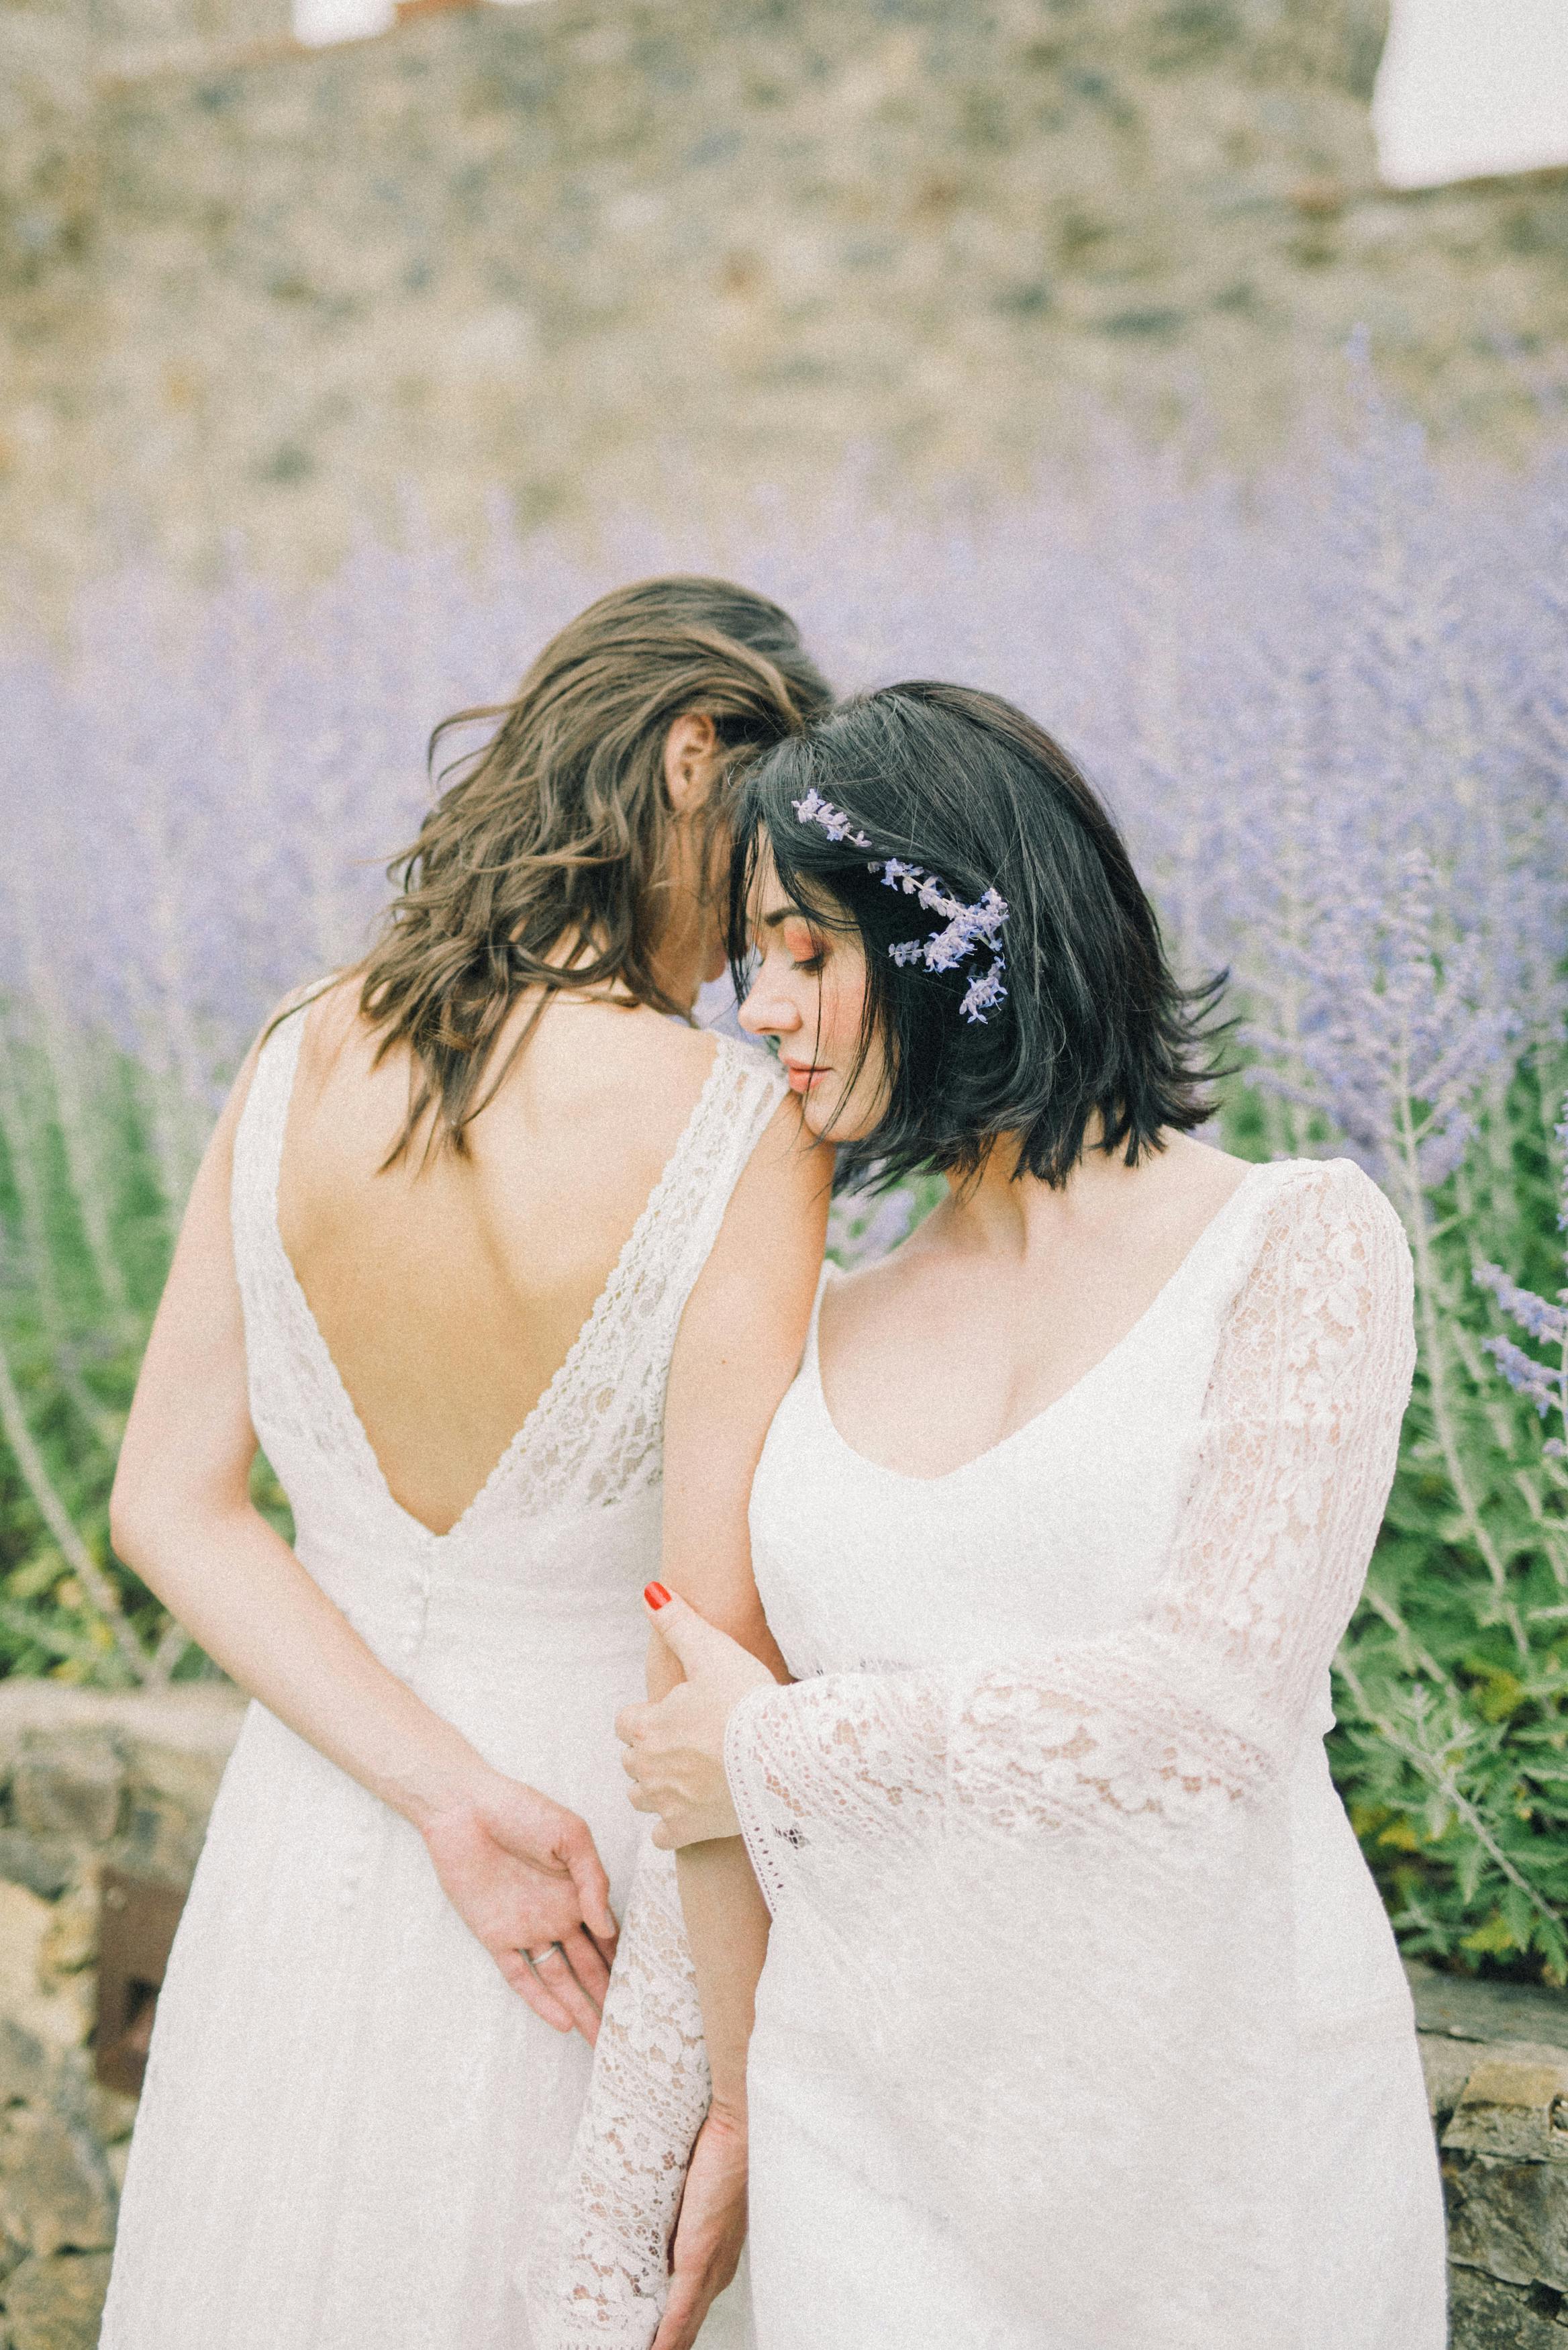 photo of women in white wedding dress standing next to each other